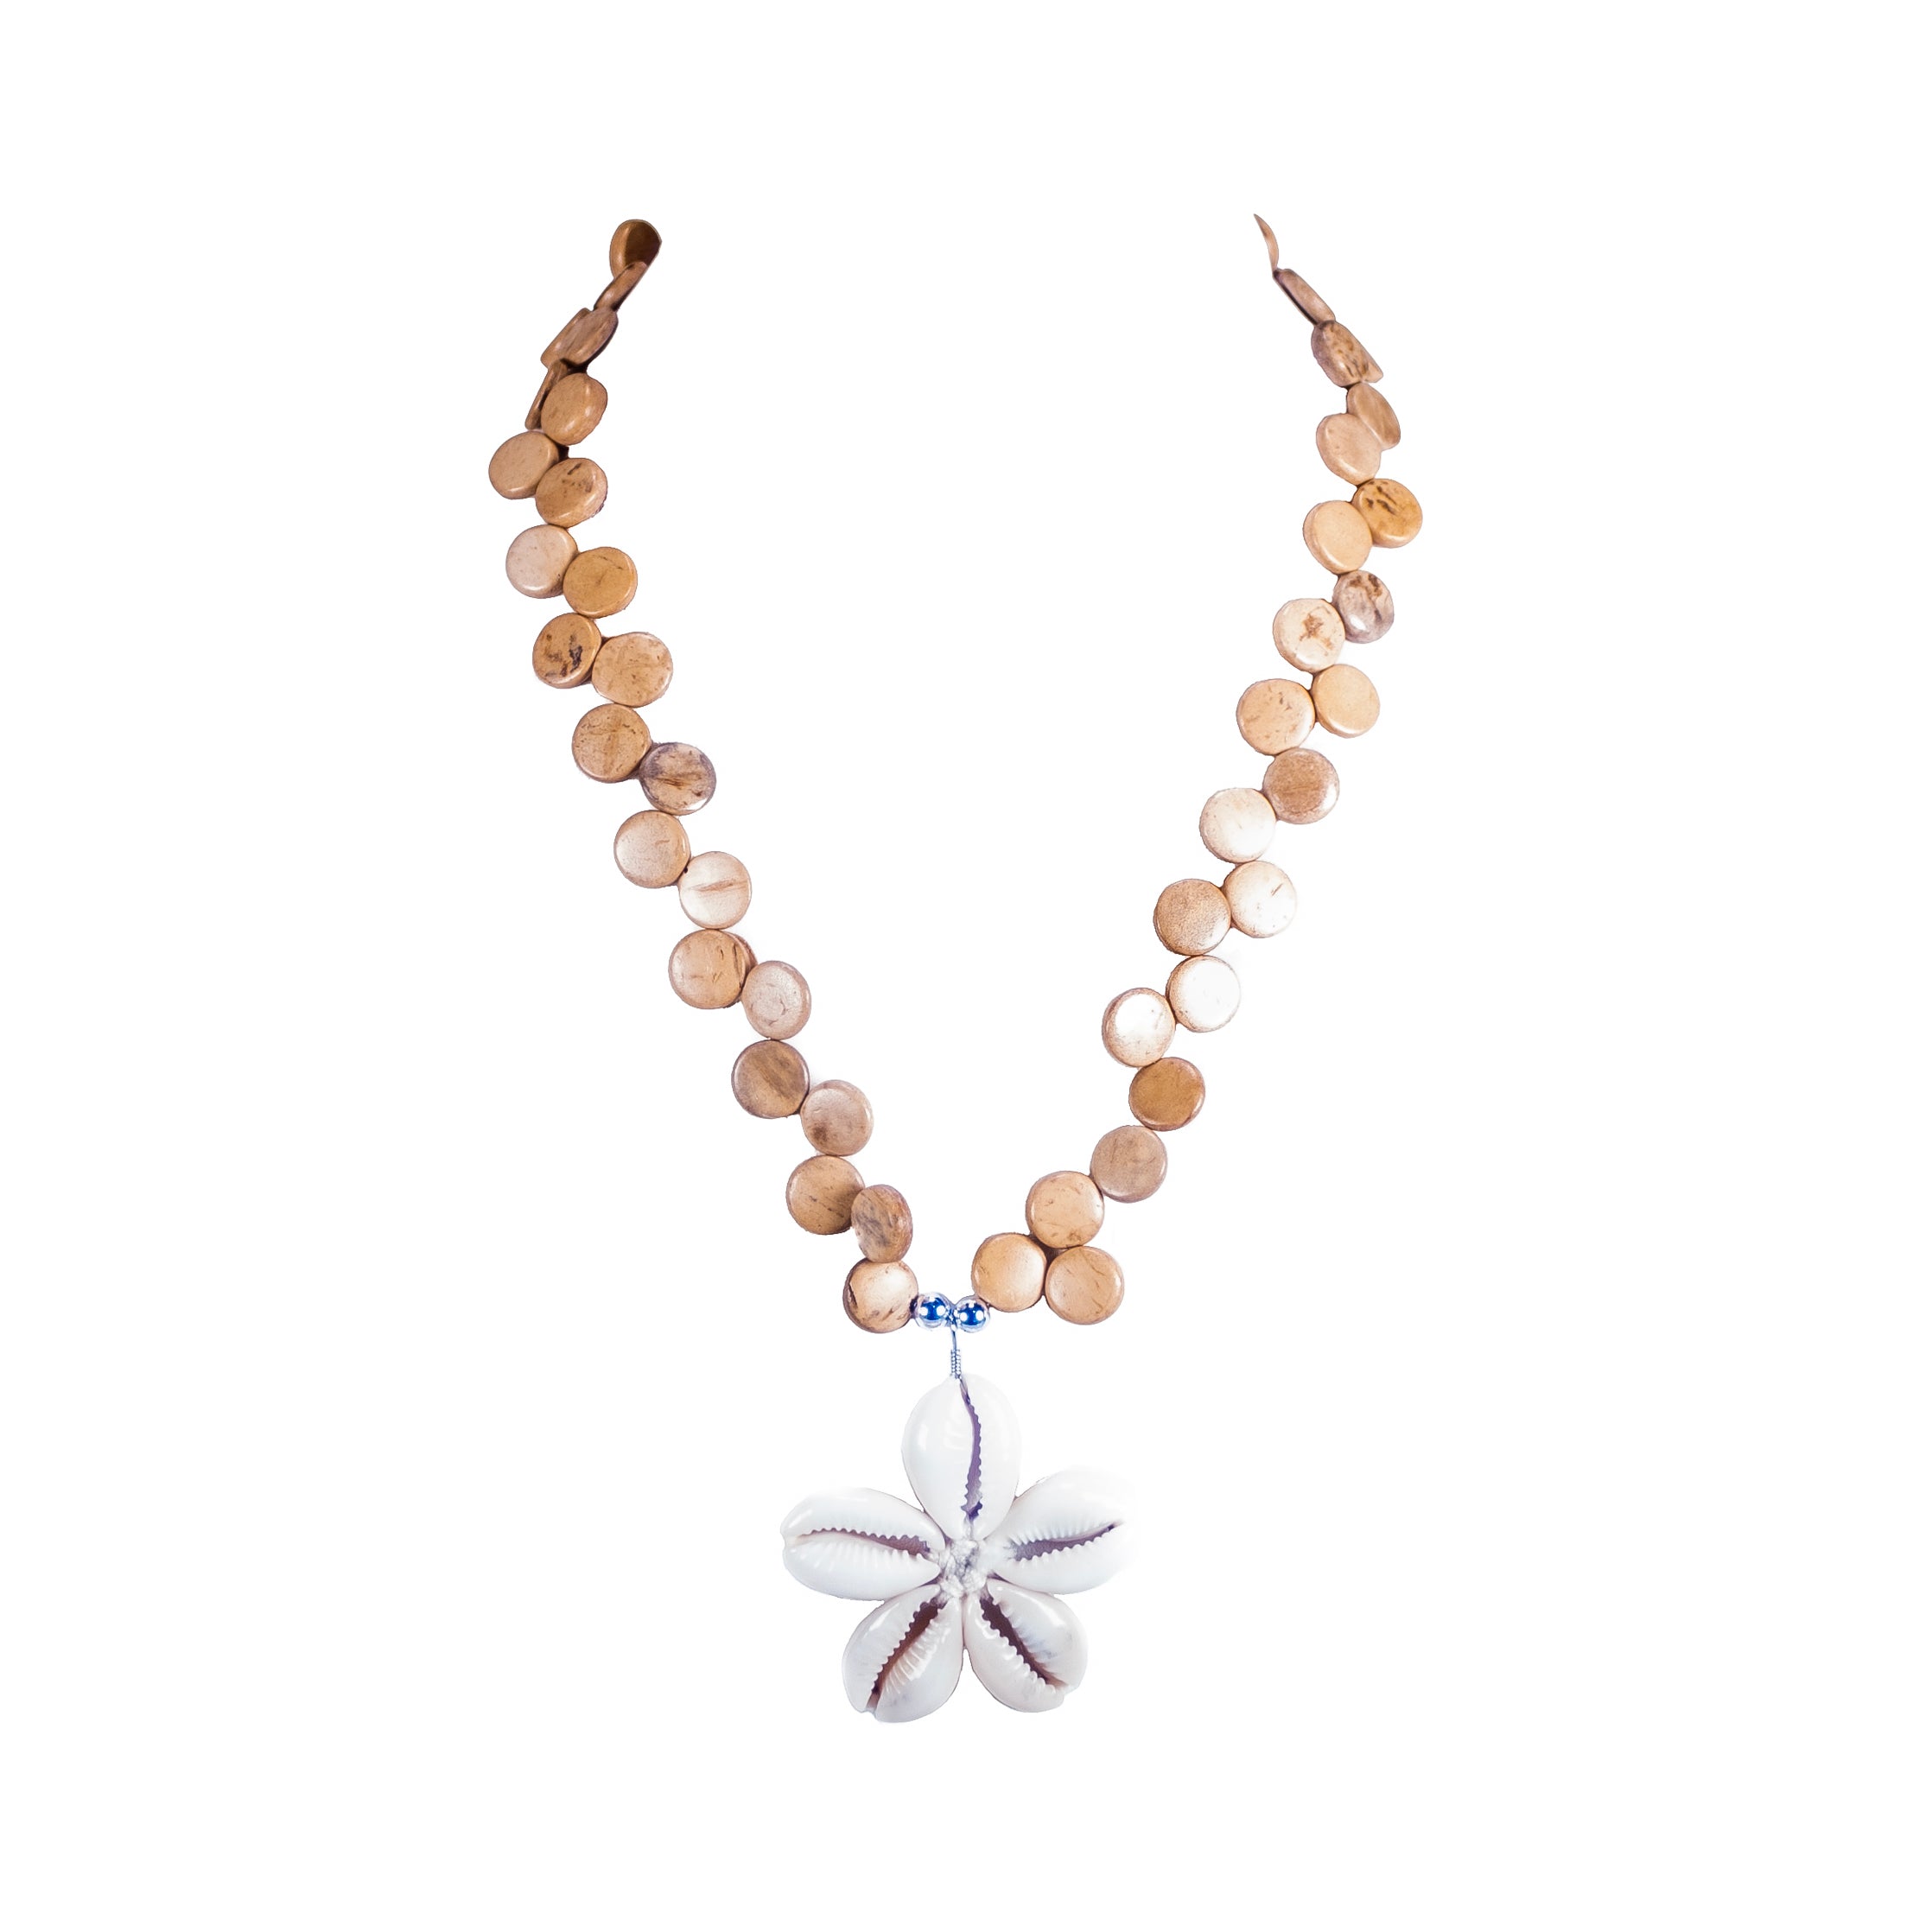 Cowrie Shells Flower Pendant on Coconut Beads Necklace